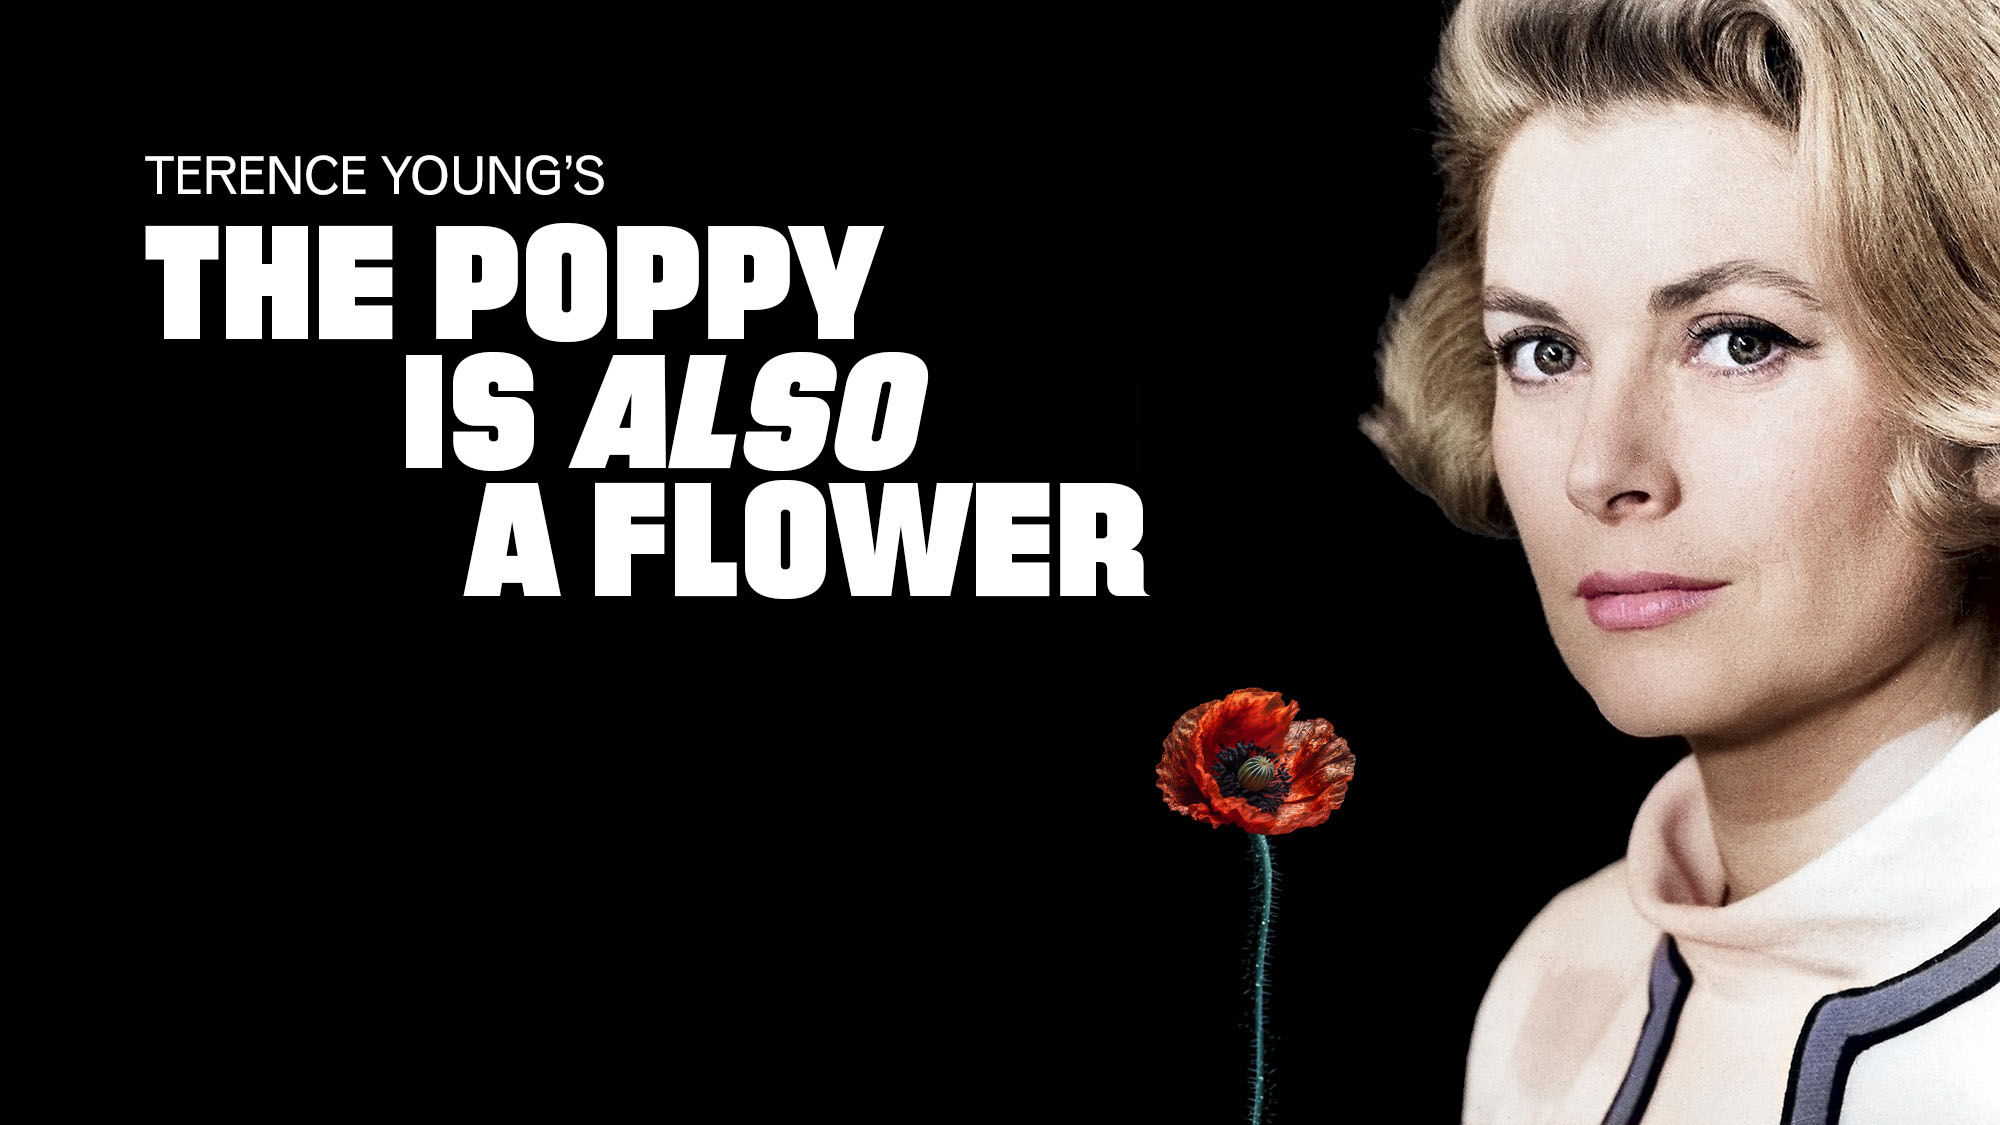 [The Poppy Is Also a Flower]